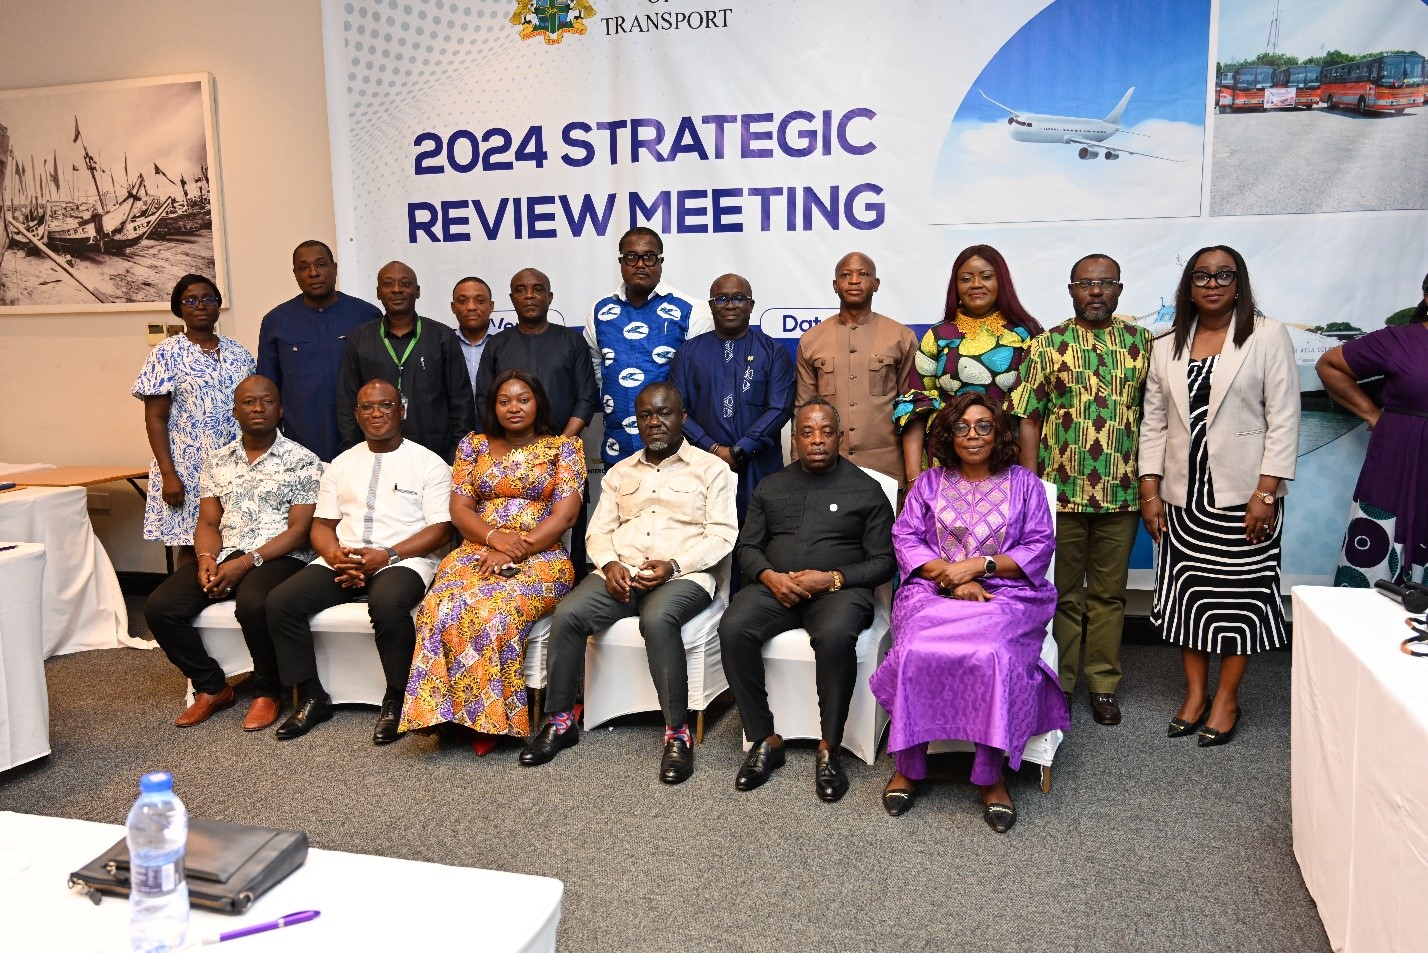 Transport minister closes 2024 strategic review meeting